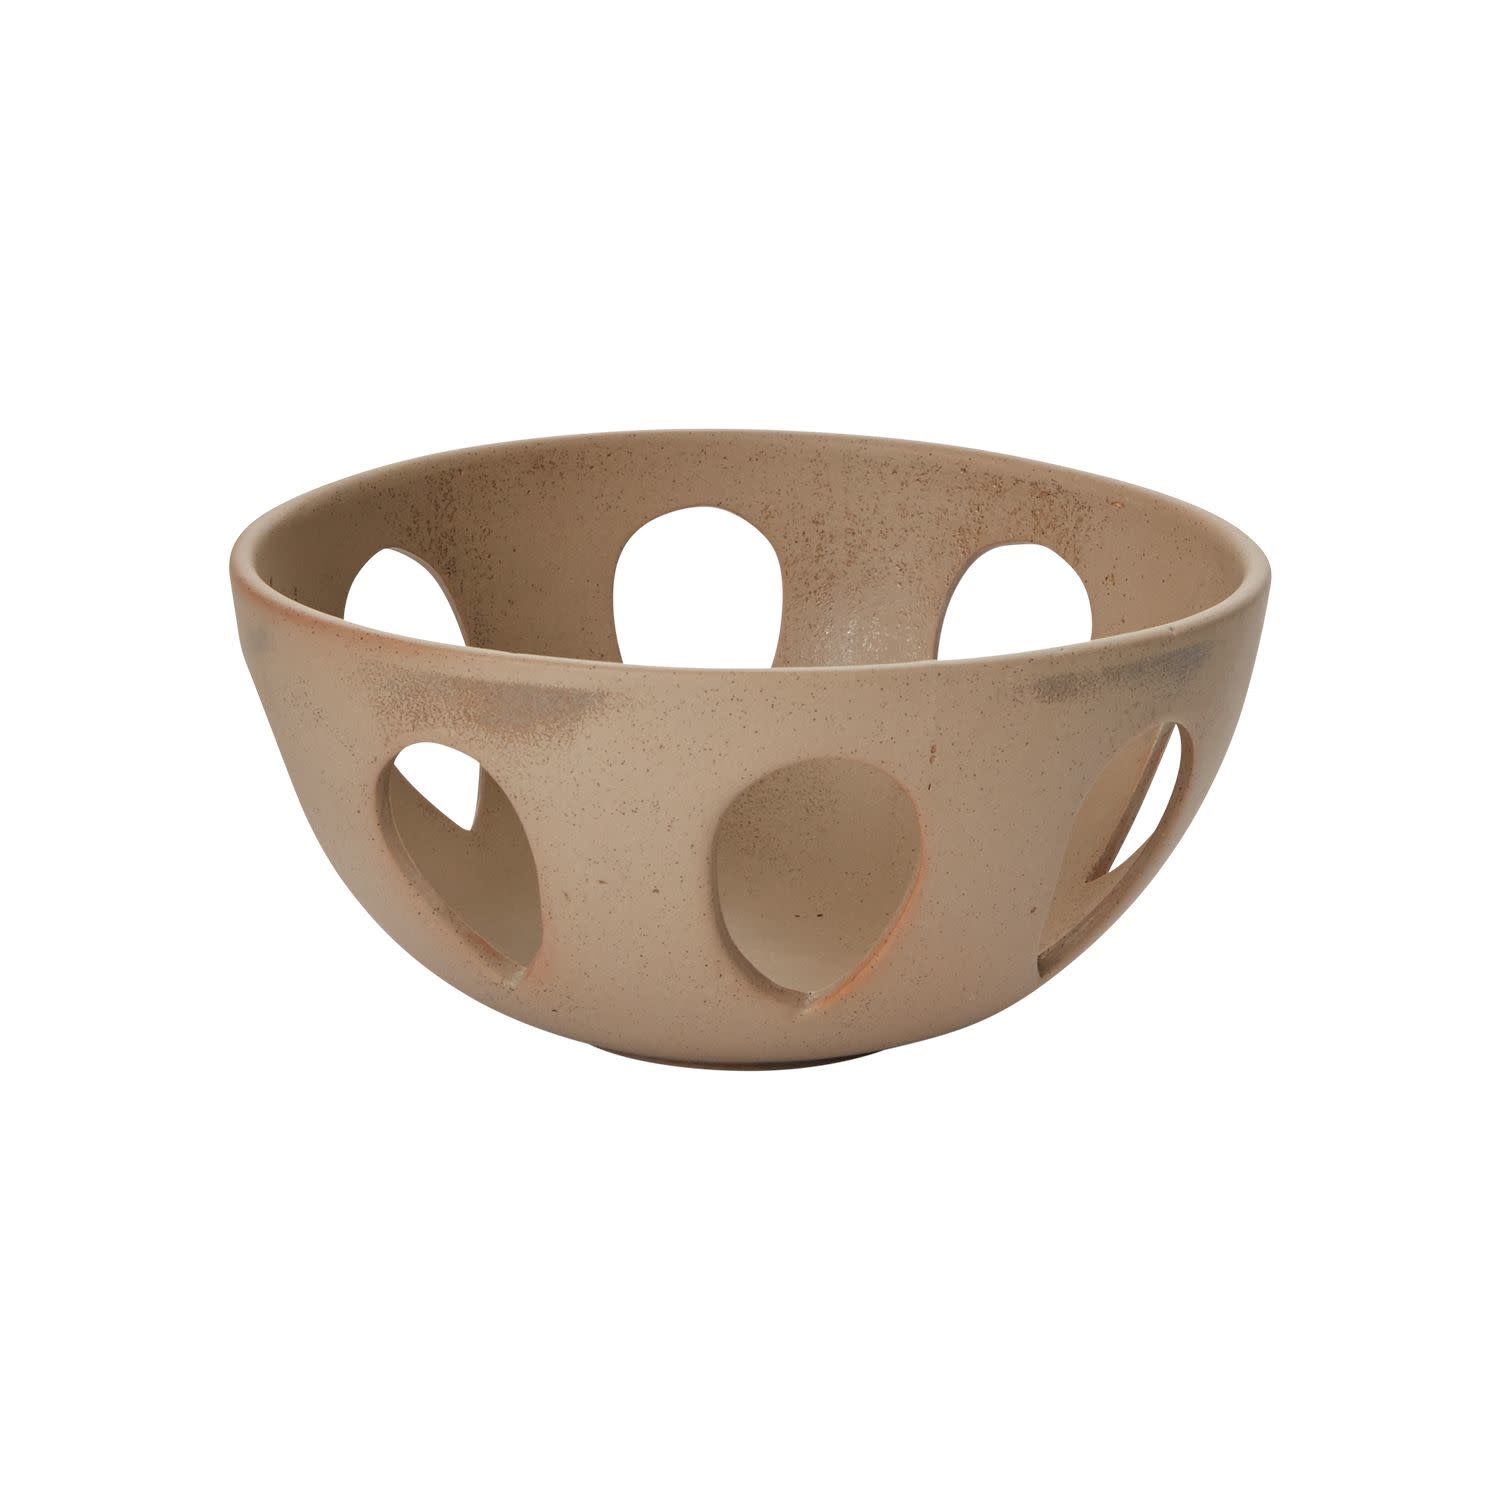 Orchard Bowl, Tan, 7 Round,  Available for local pick up